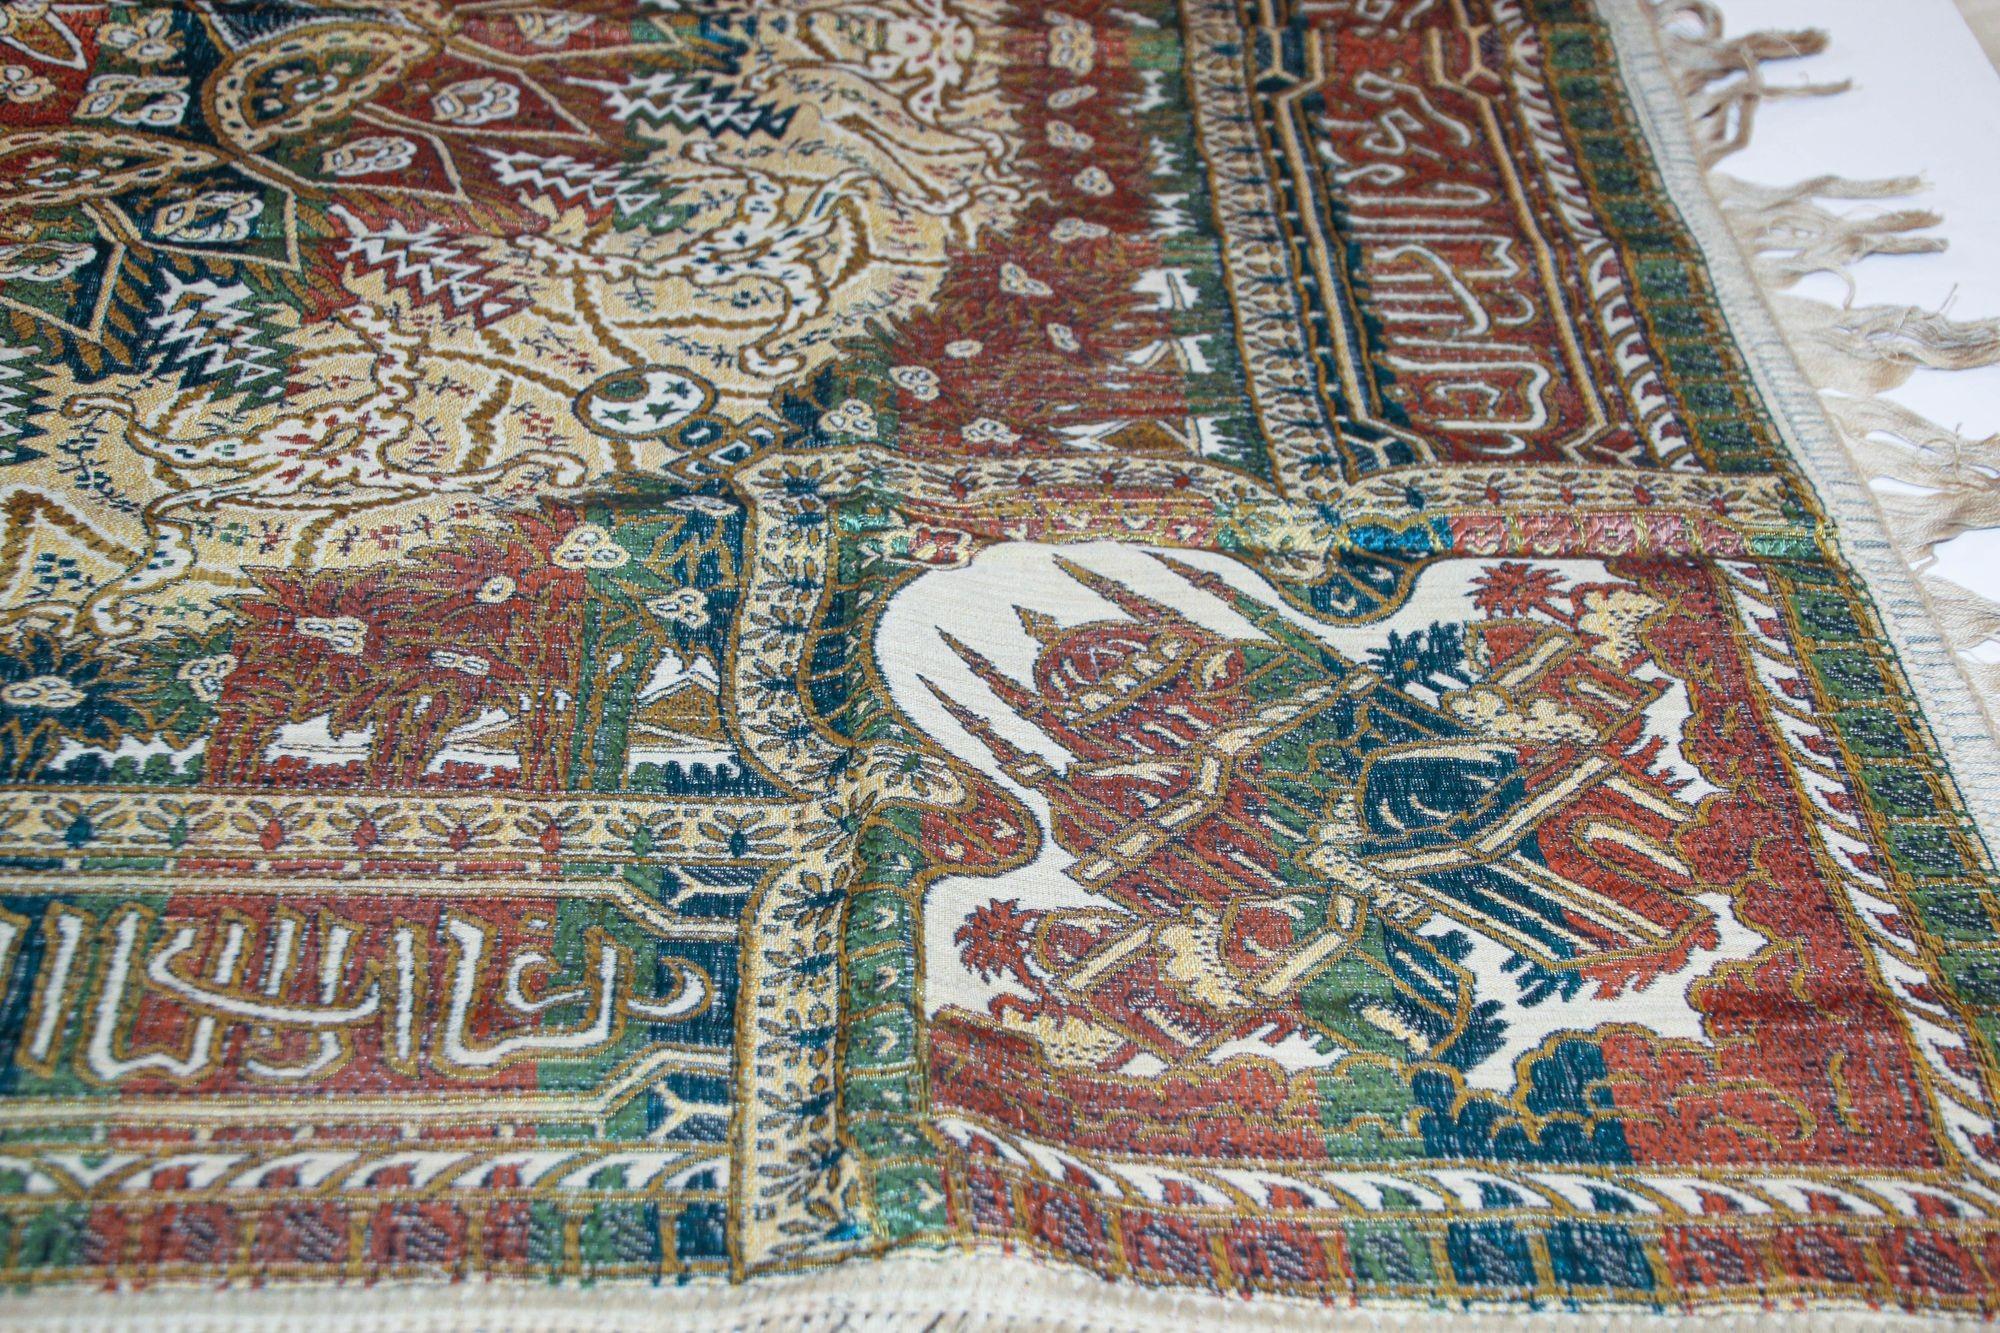 1940s Granada Islamic Spain Textile with Arabic Calligraphy Writing For Sale 6